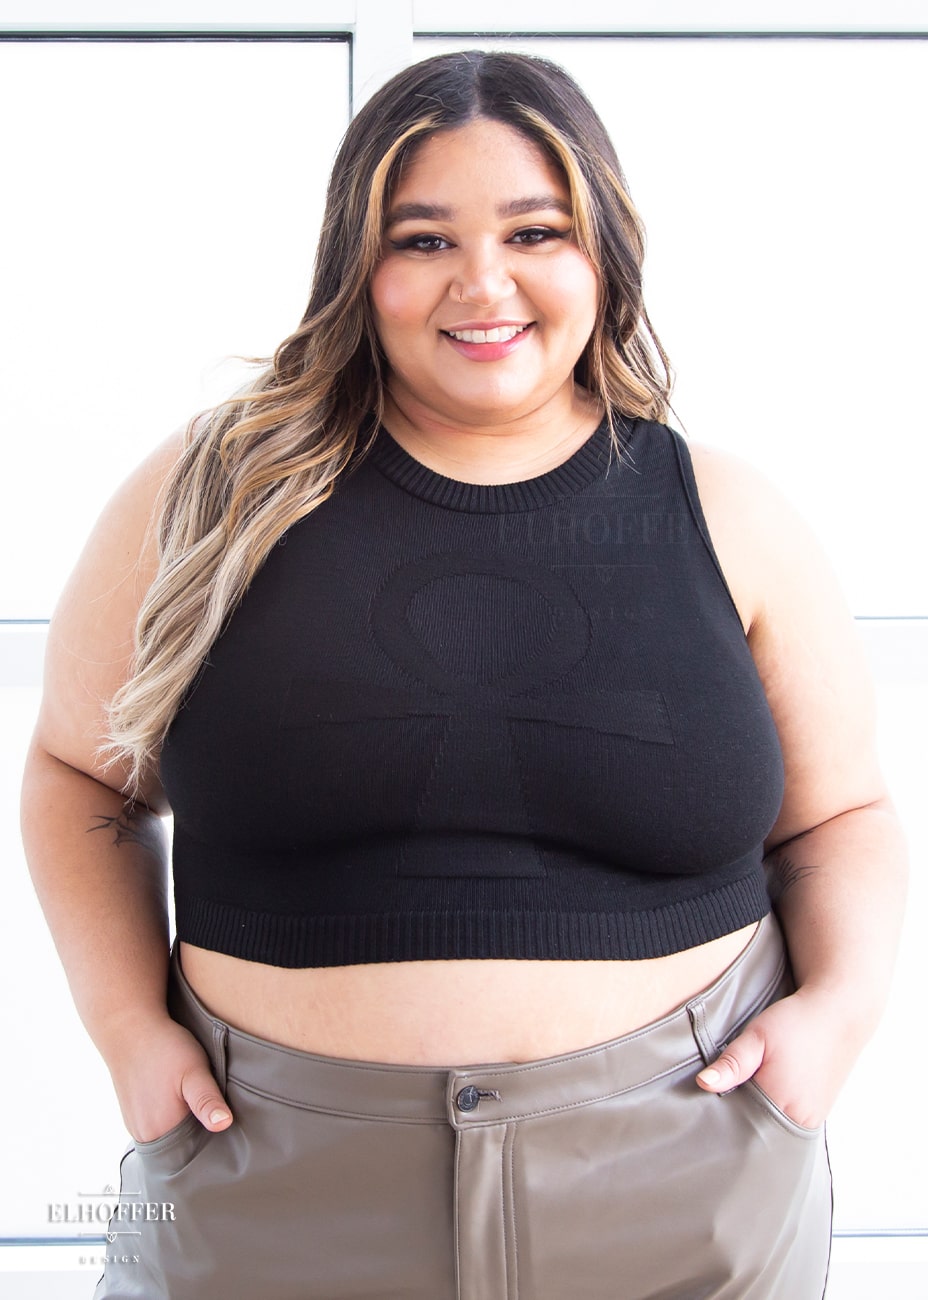 Cori, a sun kissed skinned 2xl model with long balayage hair, is smiling while wearing a sleeveless knit crop top with a large subtle ankh design on the front.